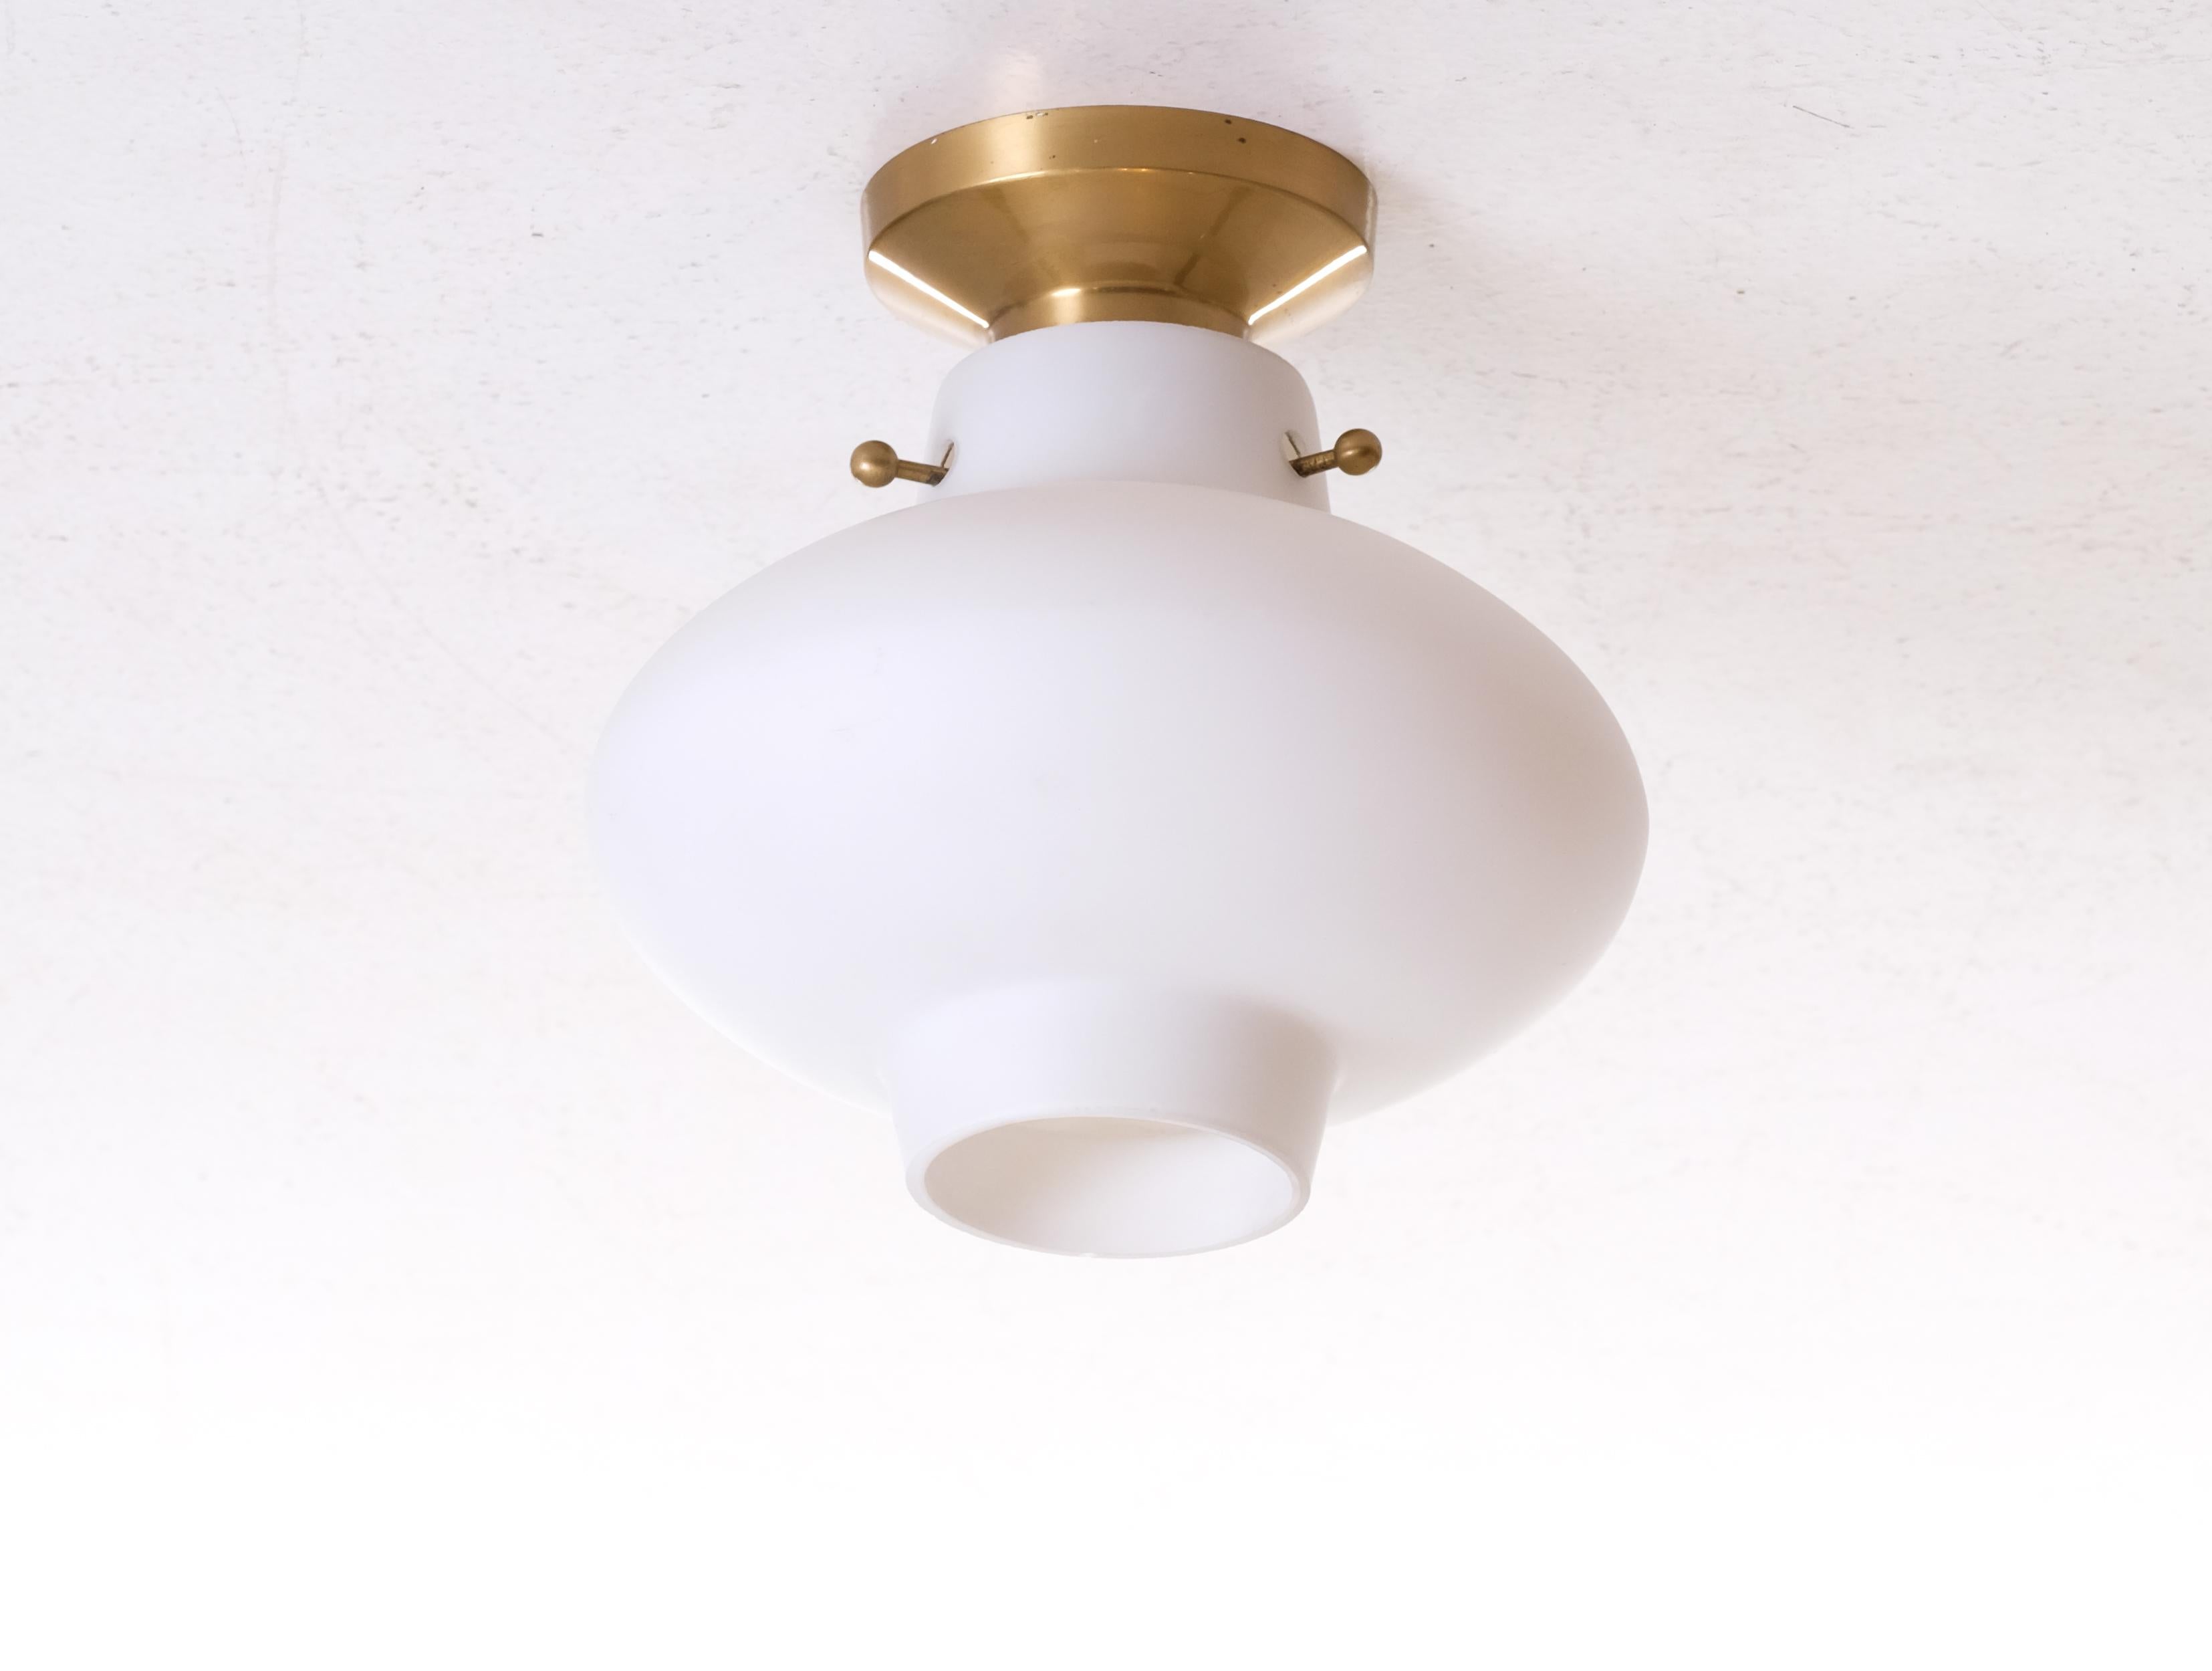 Produced by Ateljé Lyktan, Åhus, Sweden, 1950s.
Installed with 1 bulb with E27 socket.
Please note: listed price is for one (1) lamp (set of 3 available).